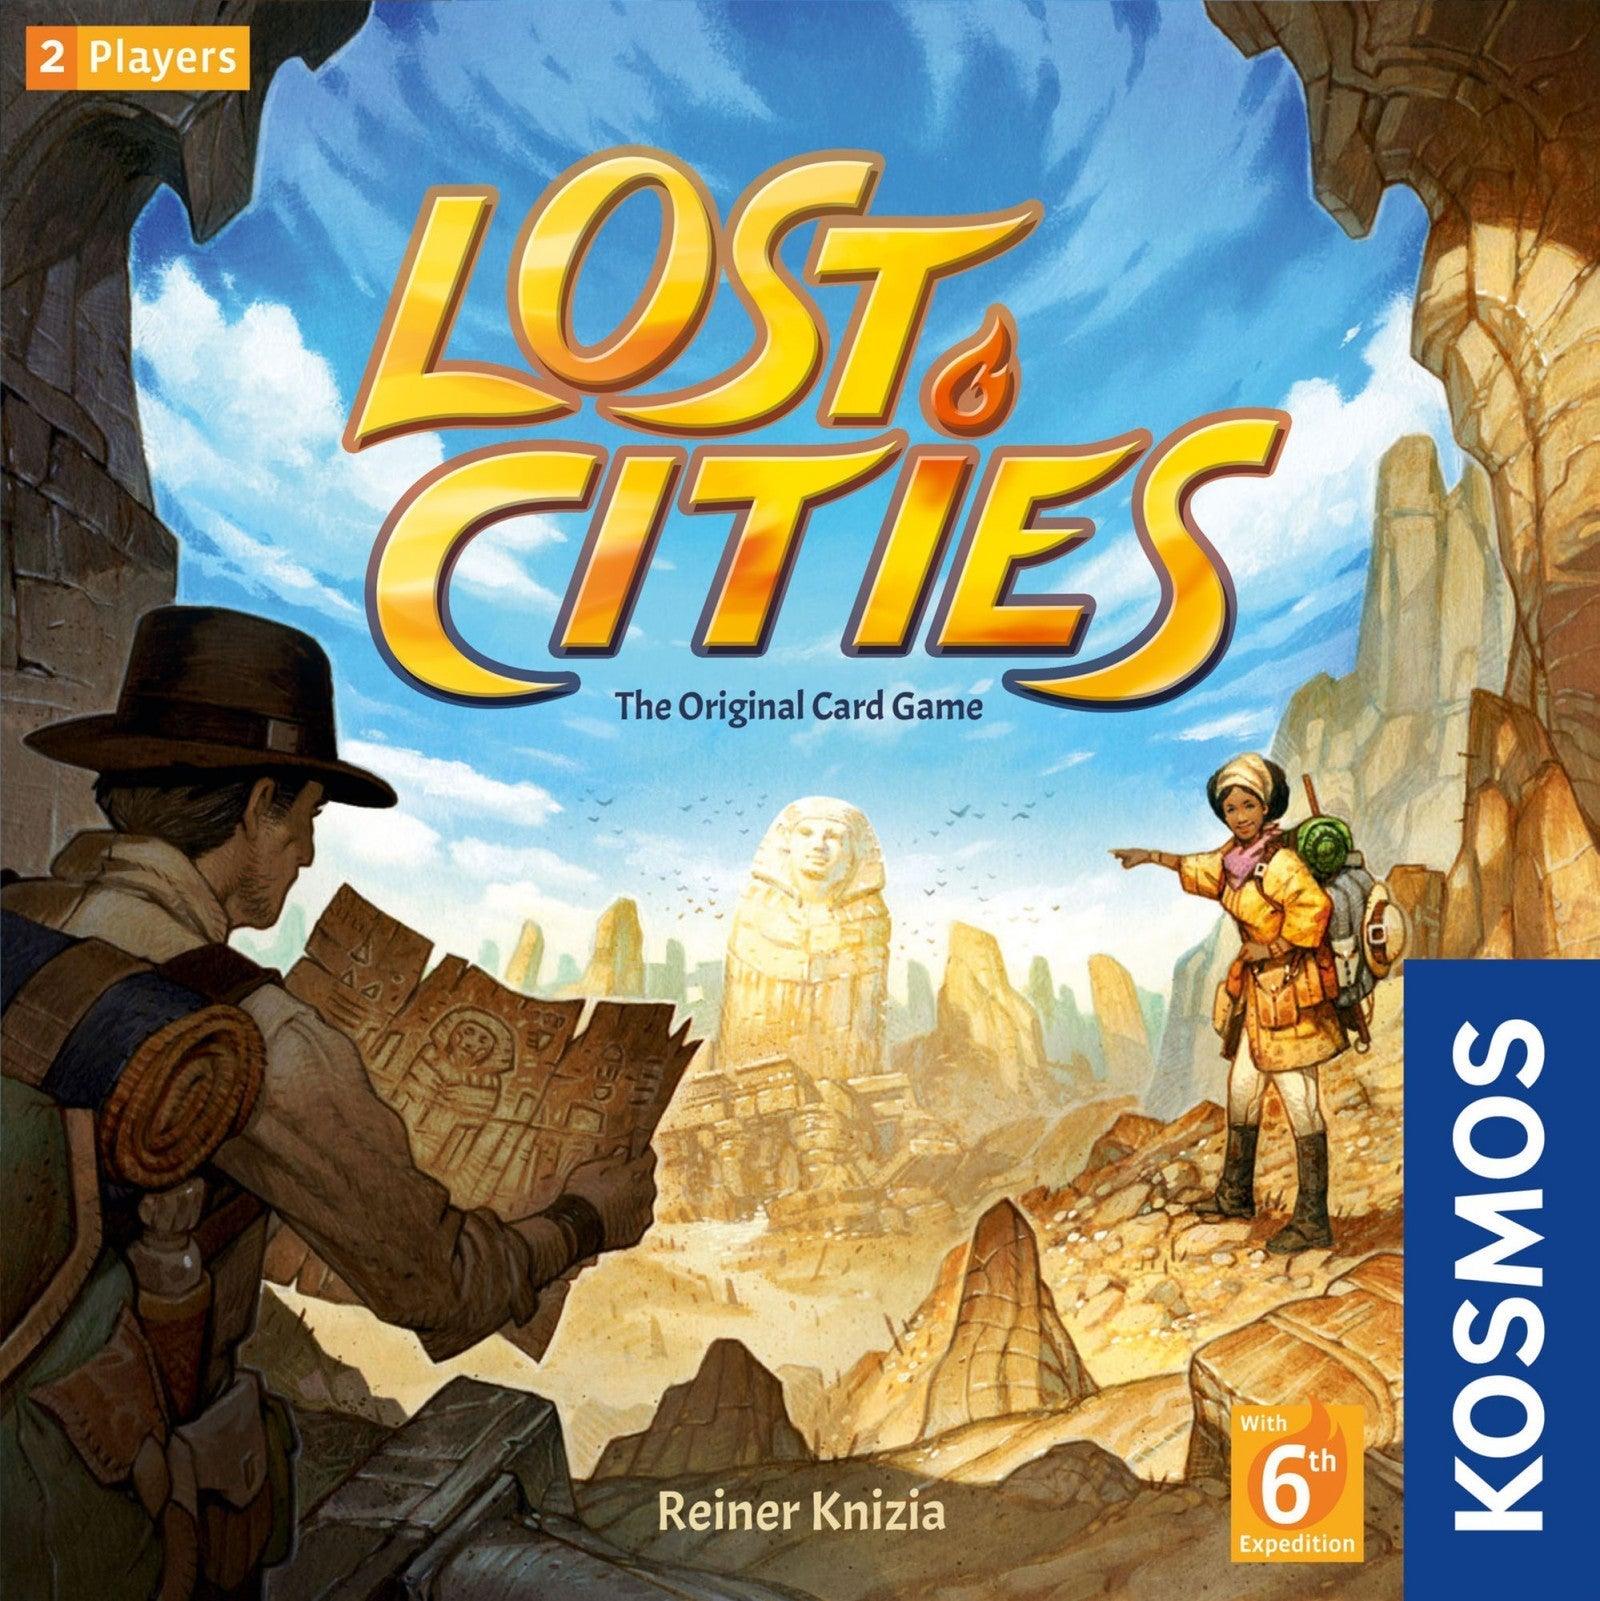 VR-29483 Lost Cities the Card Game - Kosmos - Titan Pop Culture